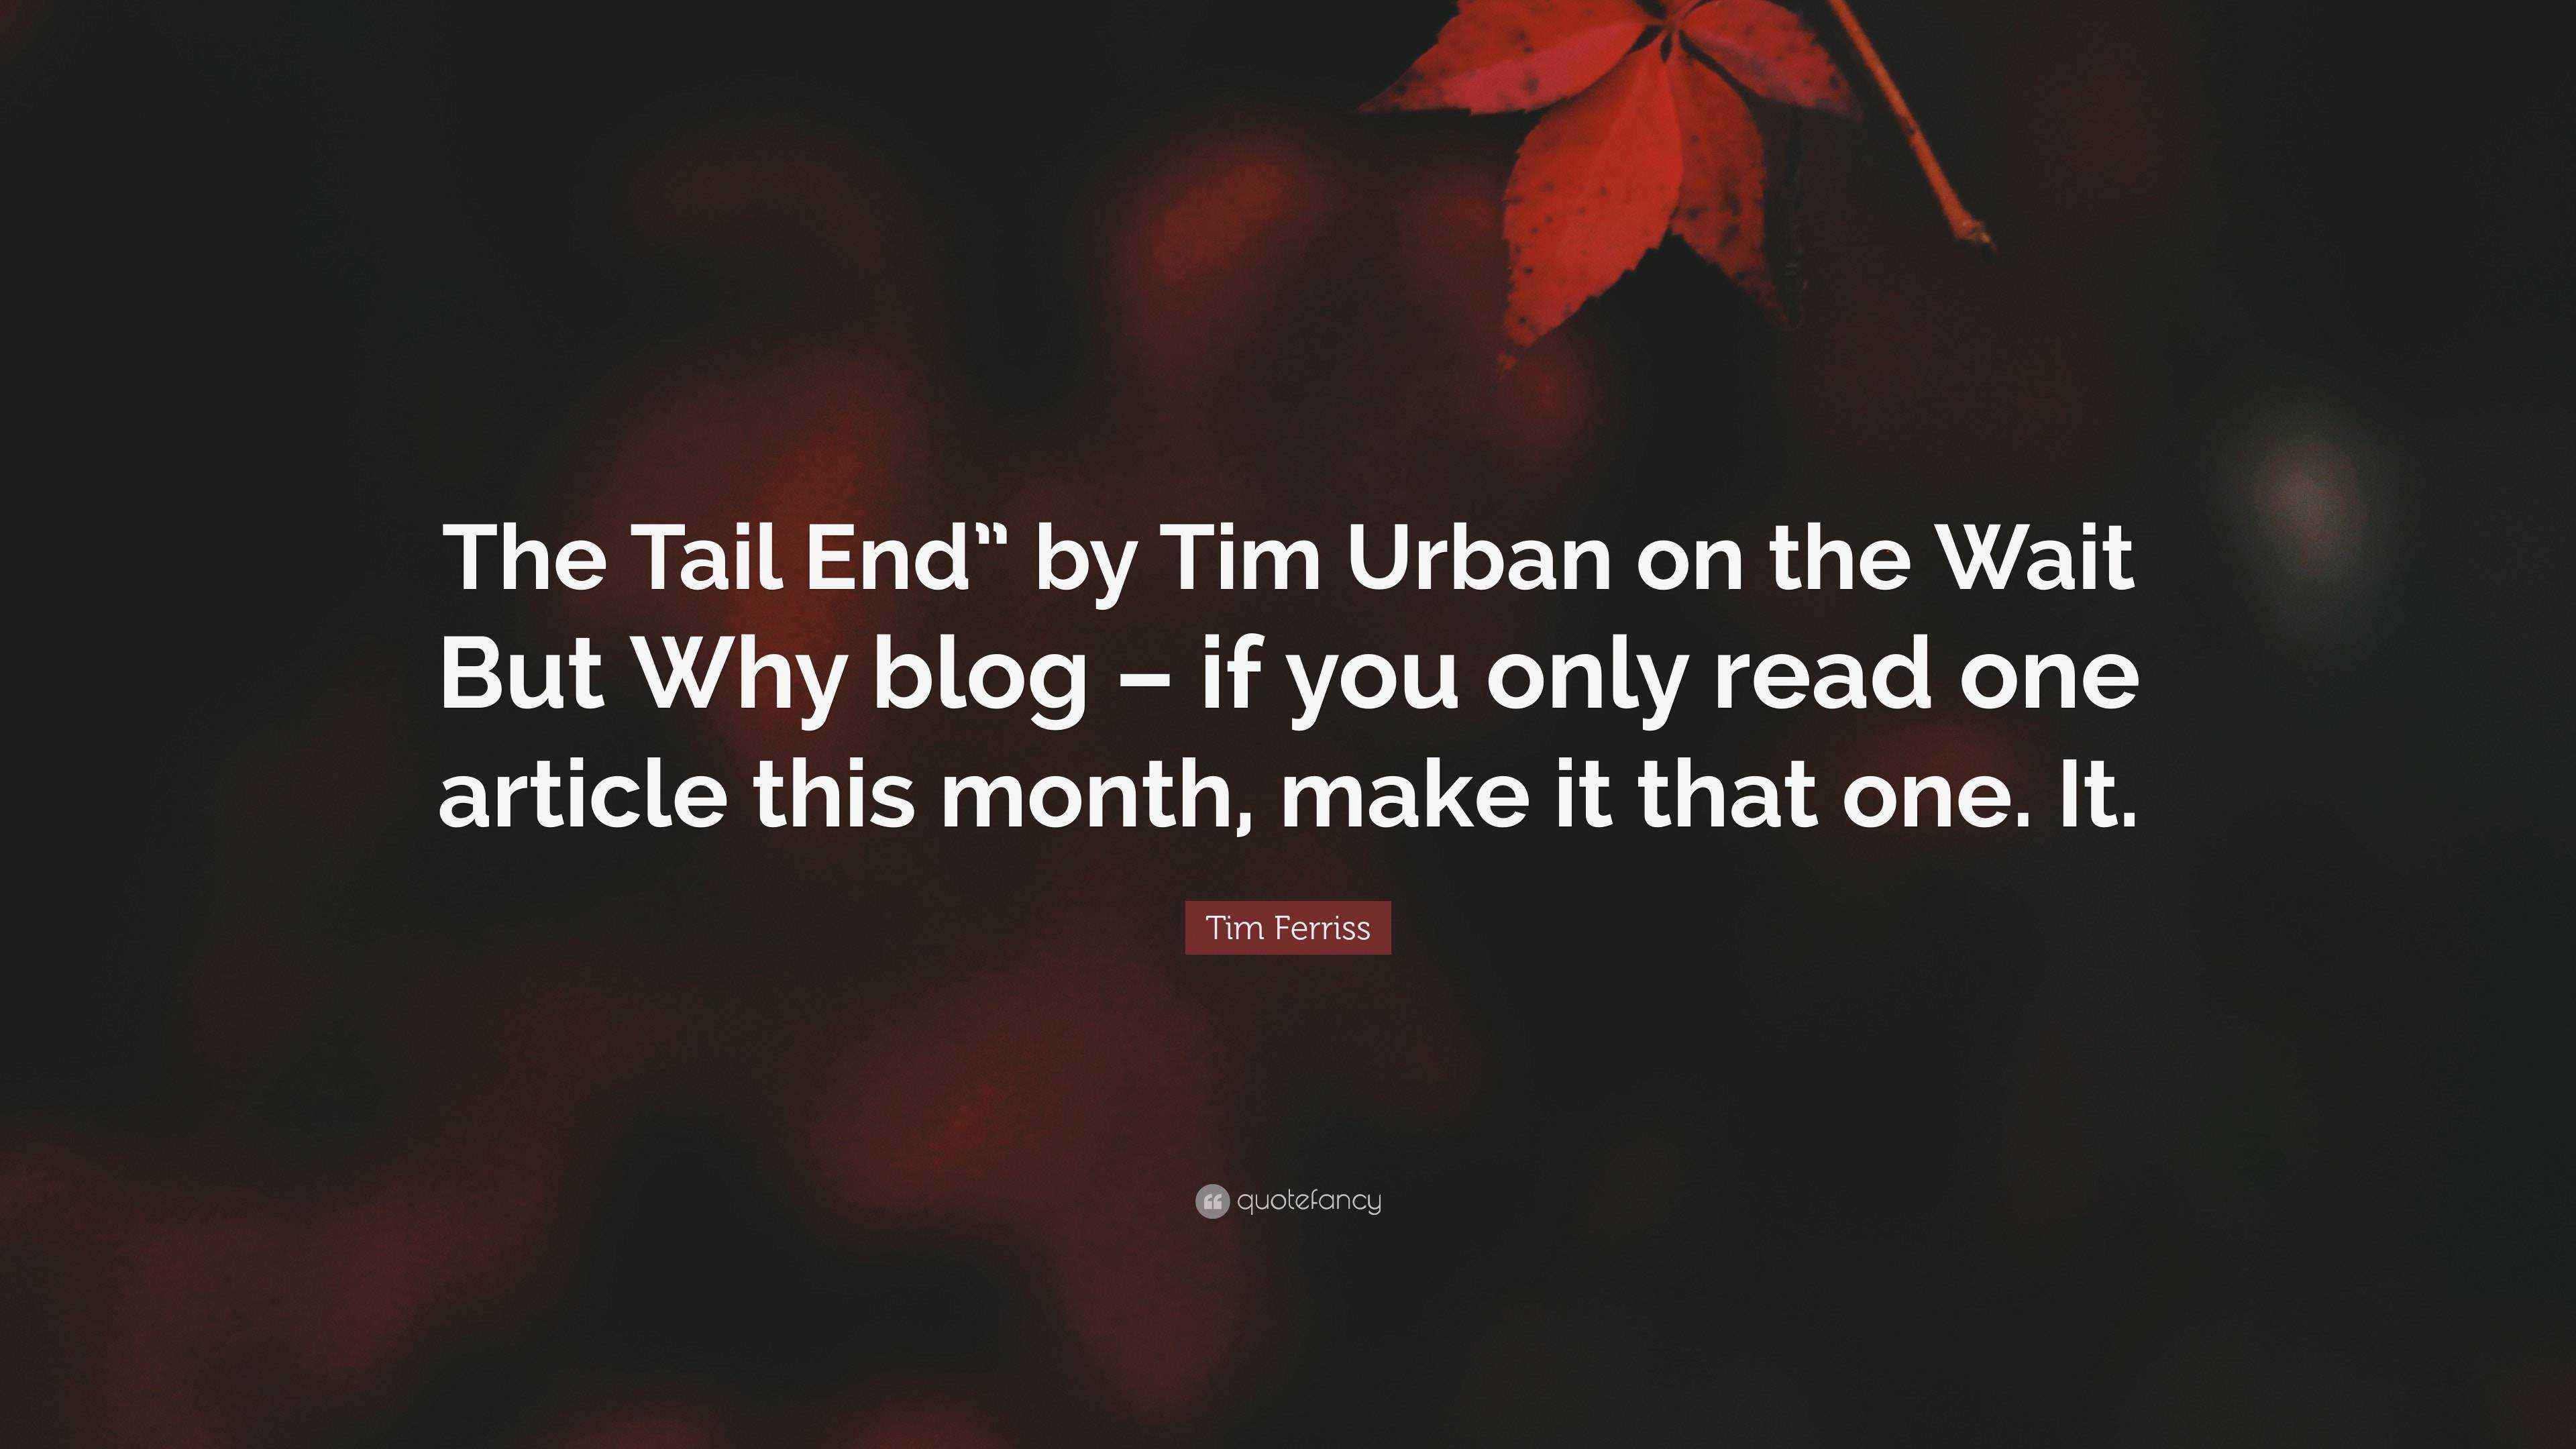 Tim Ferriss Quote: “The Tail End” by Tim Urban on Wait Why – if